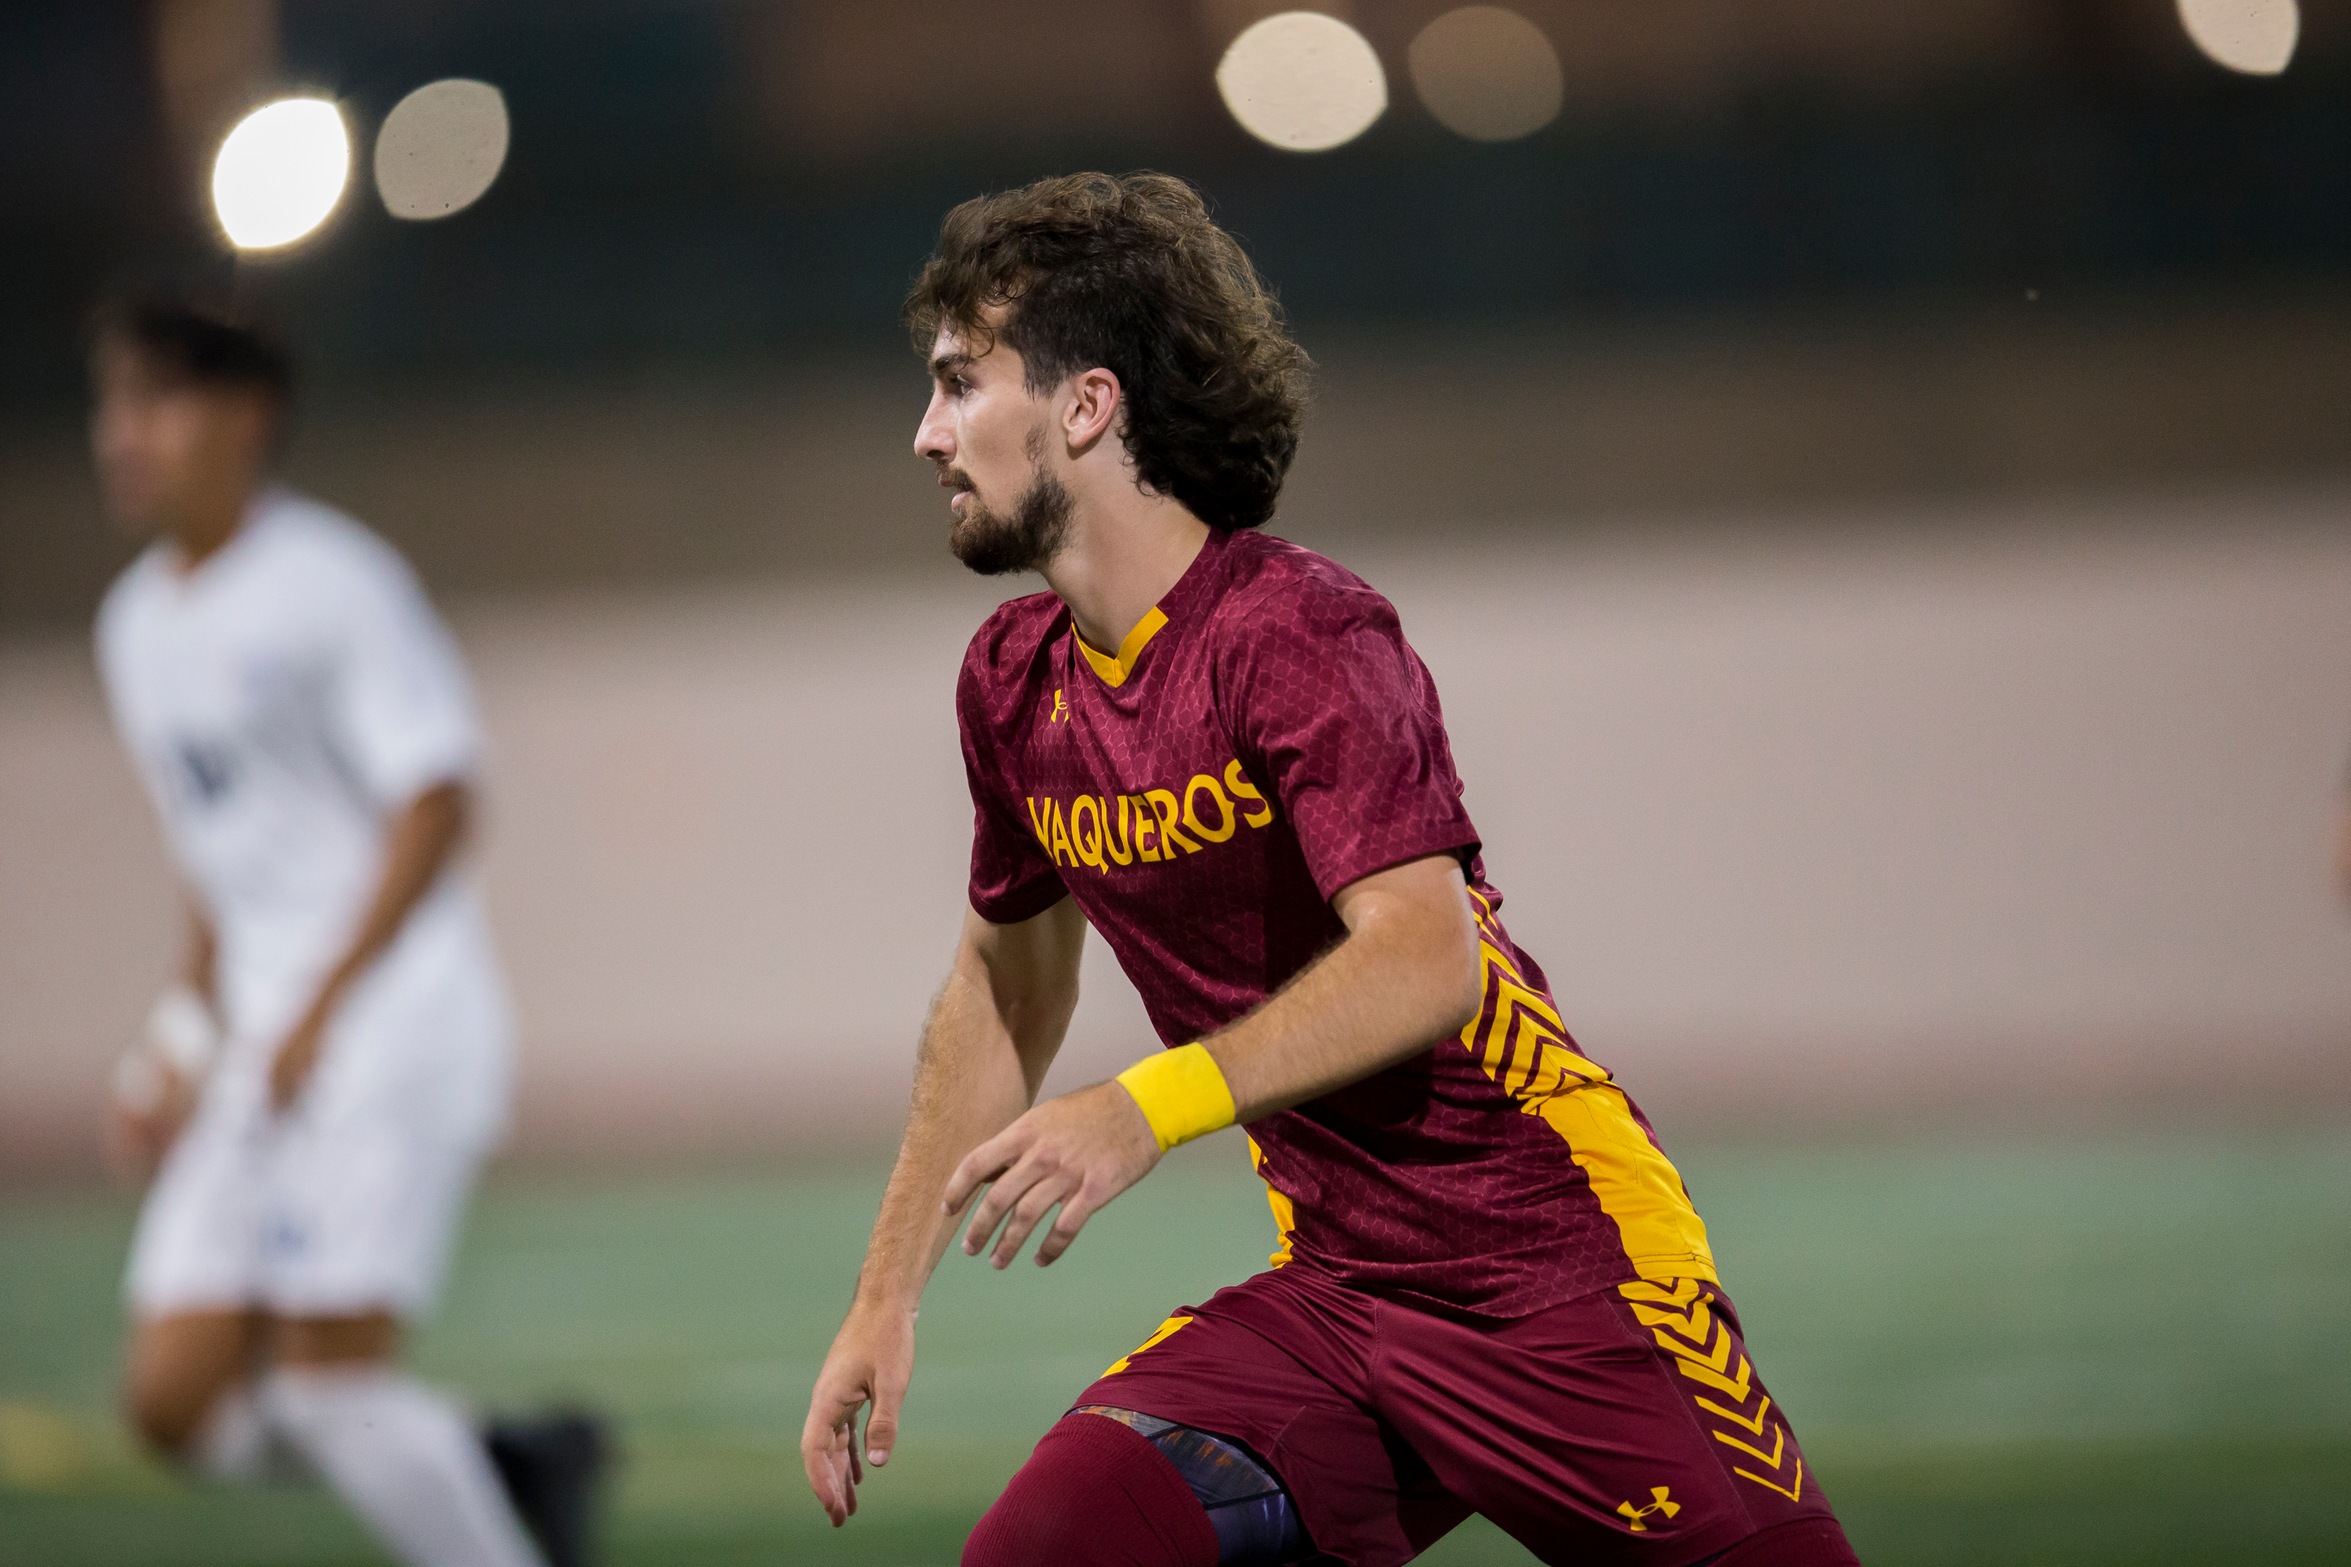 Men's Soccer improves to 4-2-1 with 3-2 win at Allan Hancock College Sept. 16